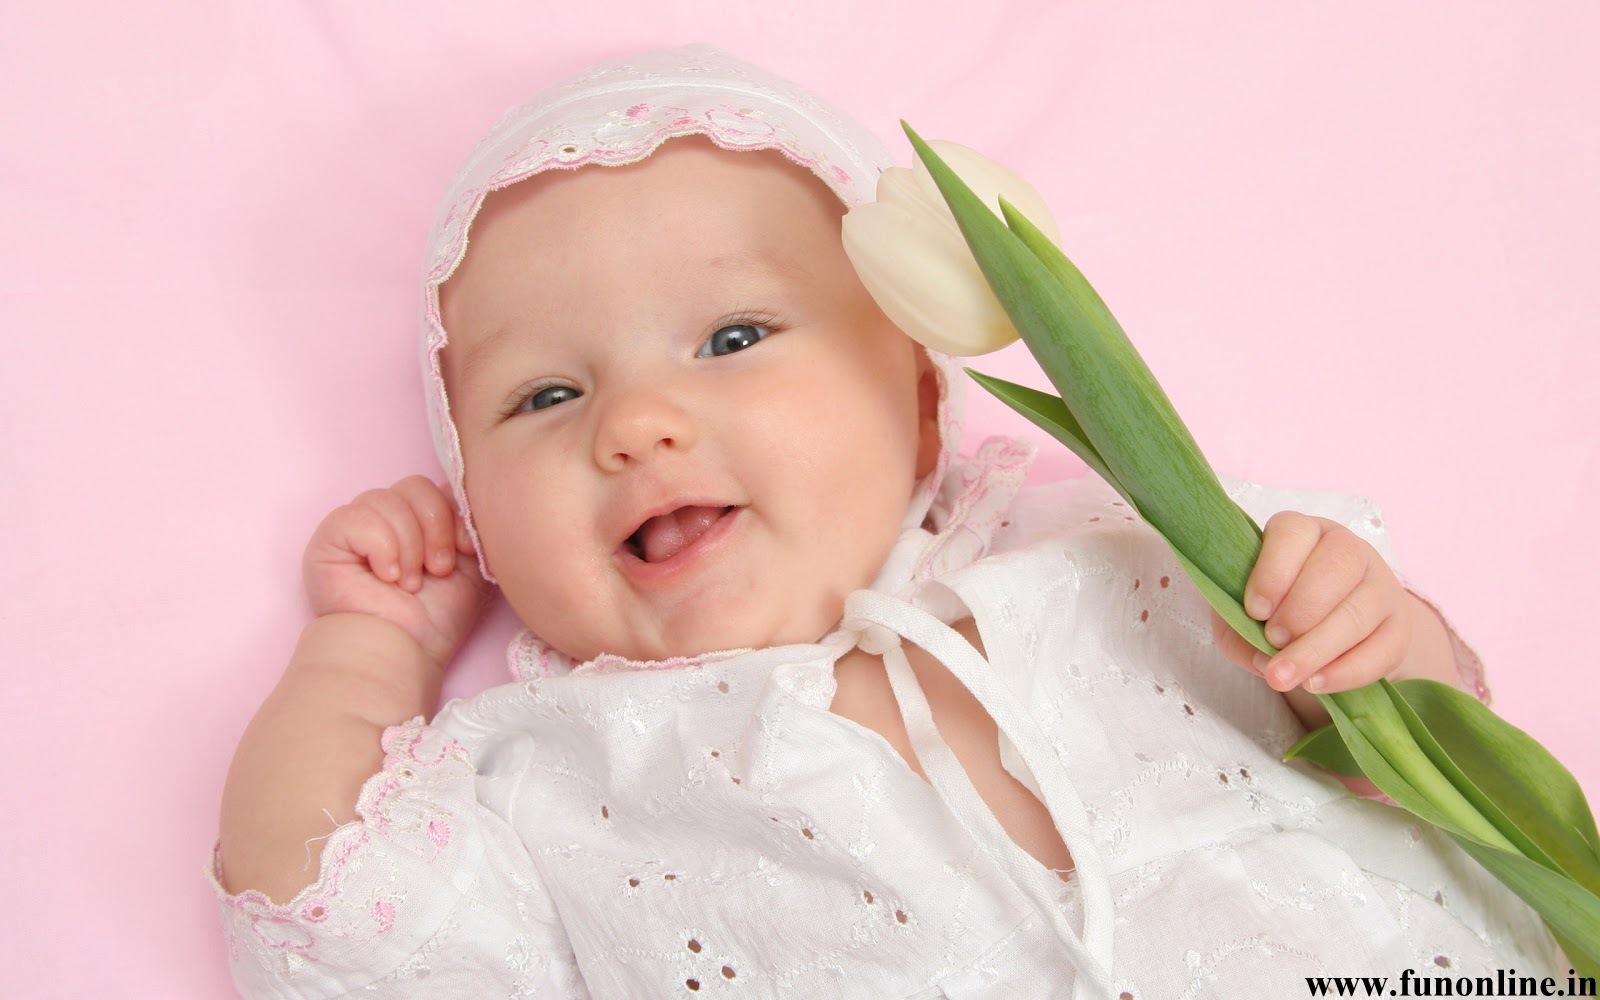  Baby Wallpapers Download Pretty and Smiling Babies HD Wallpaper